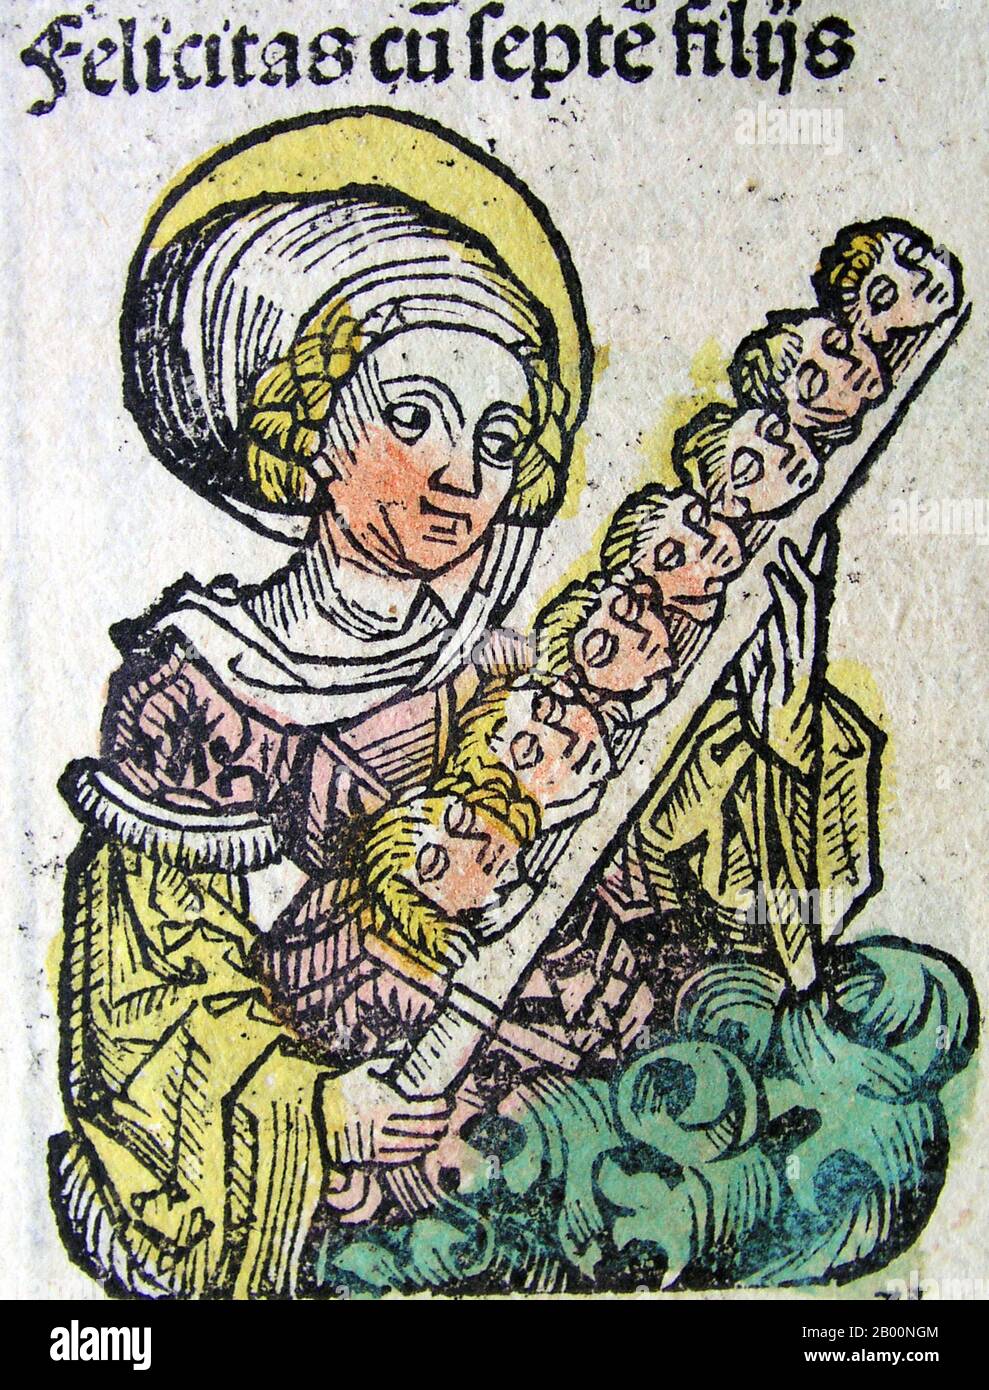 Germany: 'Felicitas'. The Nuremberg Chronicle, by Hartmann Schedel (1440-1514), 1493.  The Nuremberg Chronicle is an illustrated world history. Its structure follows the story of human history as related in the Bible, including the histories of a number of important Western cities. Written in Latin by Hartmann Schedel, with a version in German translation by Georg Alt, it appeared in 1493. It is one of the best-documented early printed books. It is classified as an incunabulum, a book, pamphlet, or broadside that was printed (not handwritten) before the year 1501 in Europe. Stock Photo